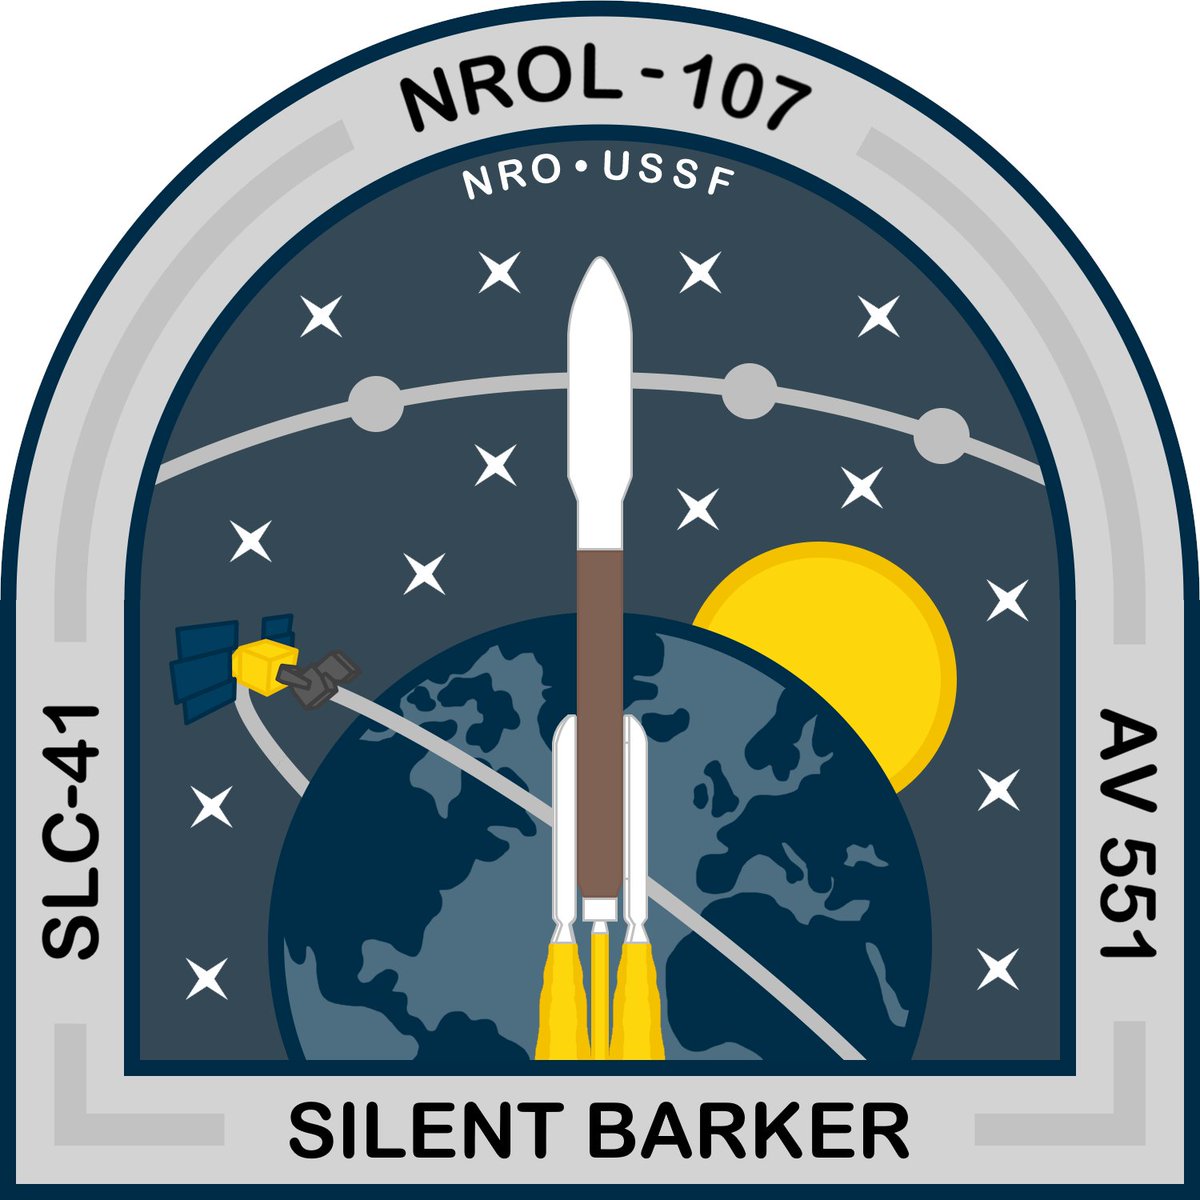 A presentation from the US Space Force reveals that the next Atlas V is scheduled for August 29th! The mission, known as NROL-107, will carry multiple satellites for the joint NRO-USSF Silent Barker Program. (Disclaimer: the 551 configuration shown in the patch is not confirmed) https://t.co/6ZtYiDYx31 https://t.co/aN1gFMxNLg